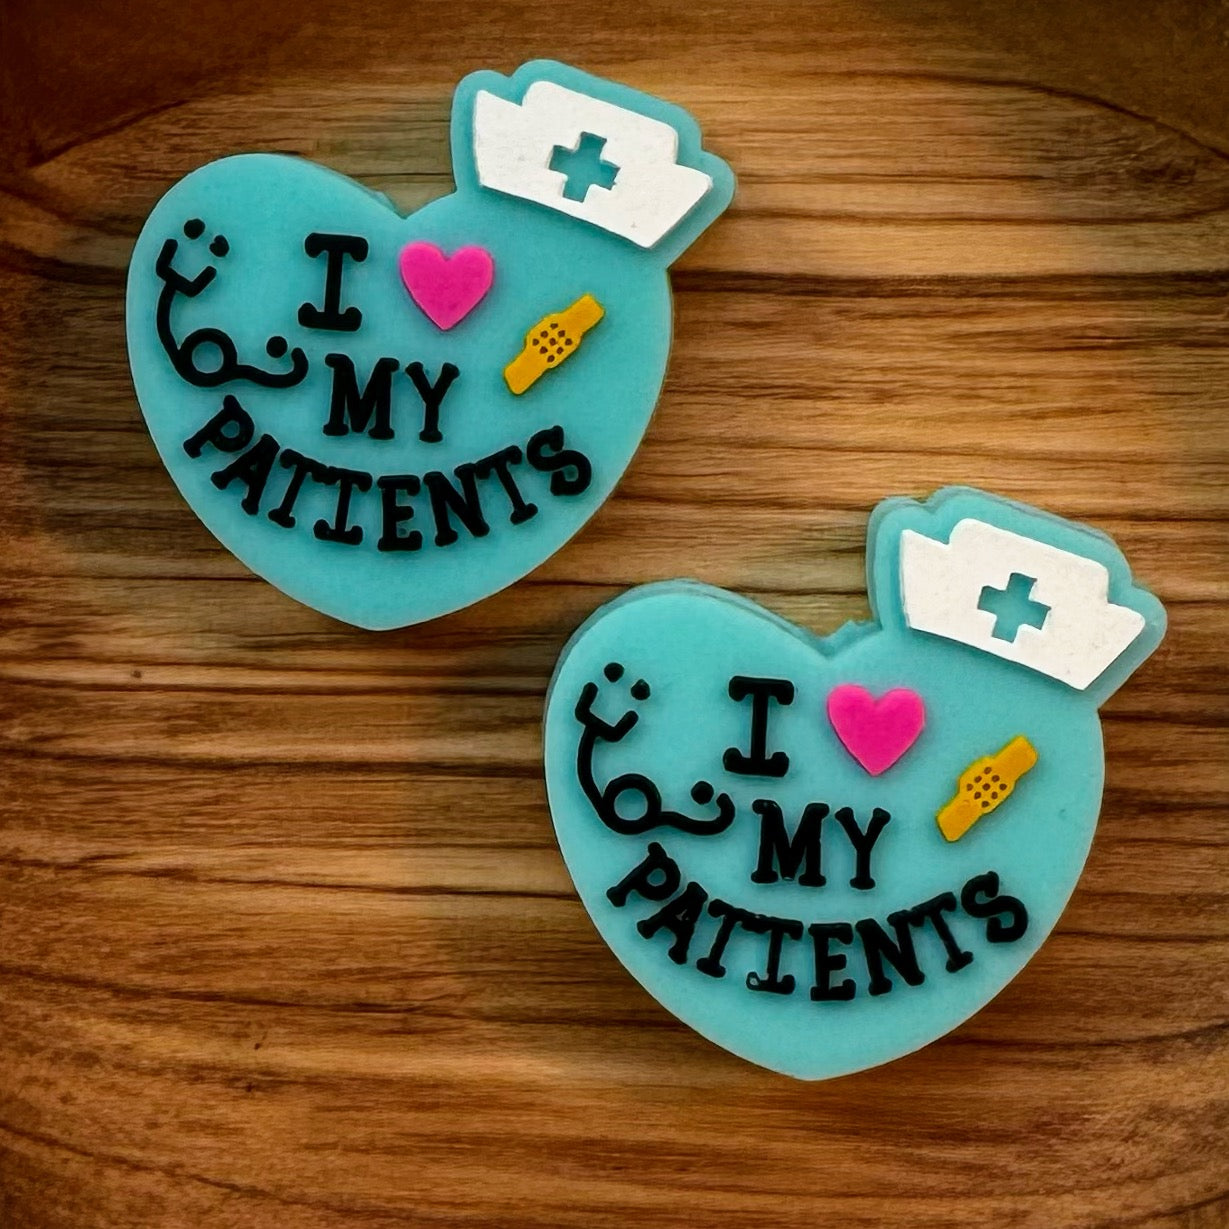 I Love My Patients Focal